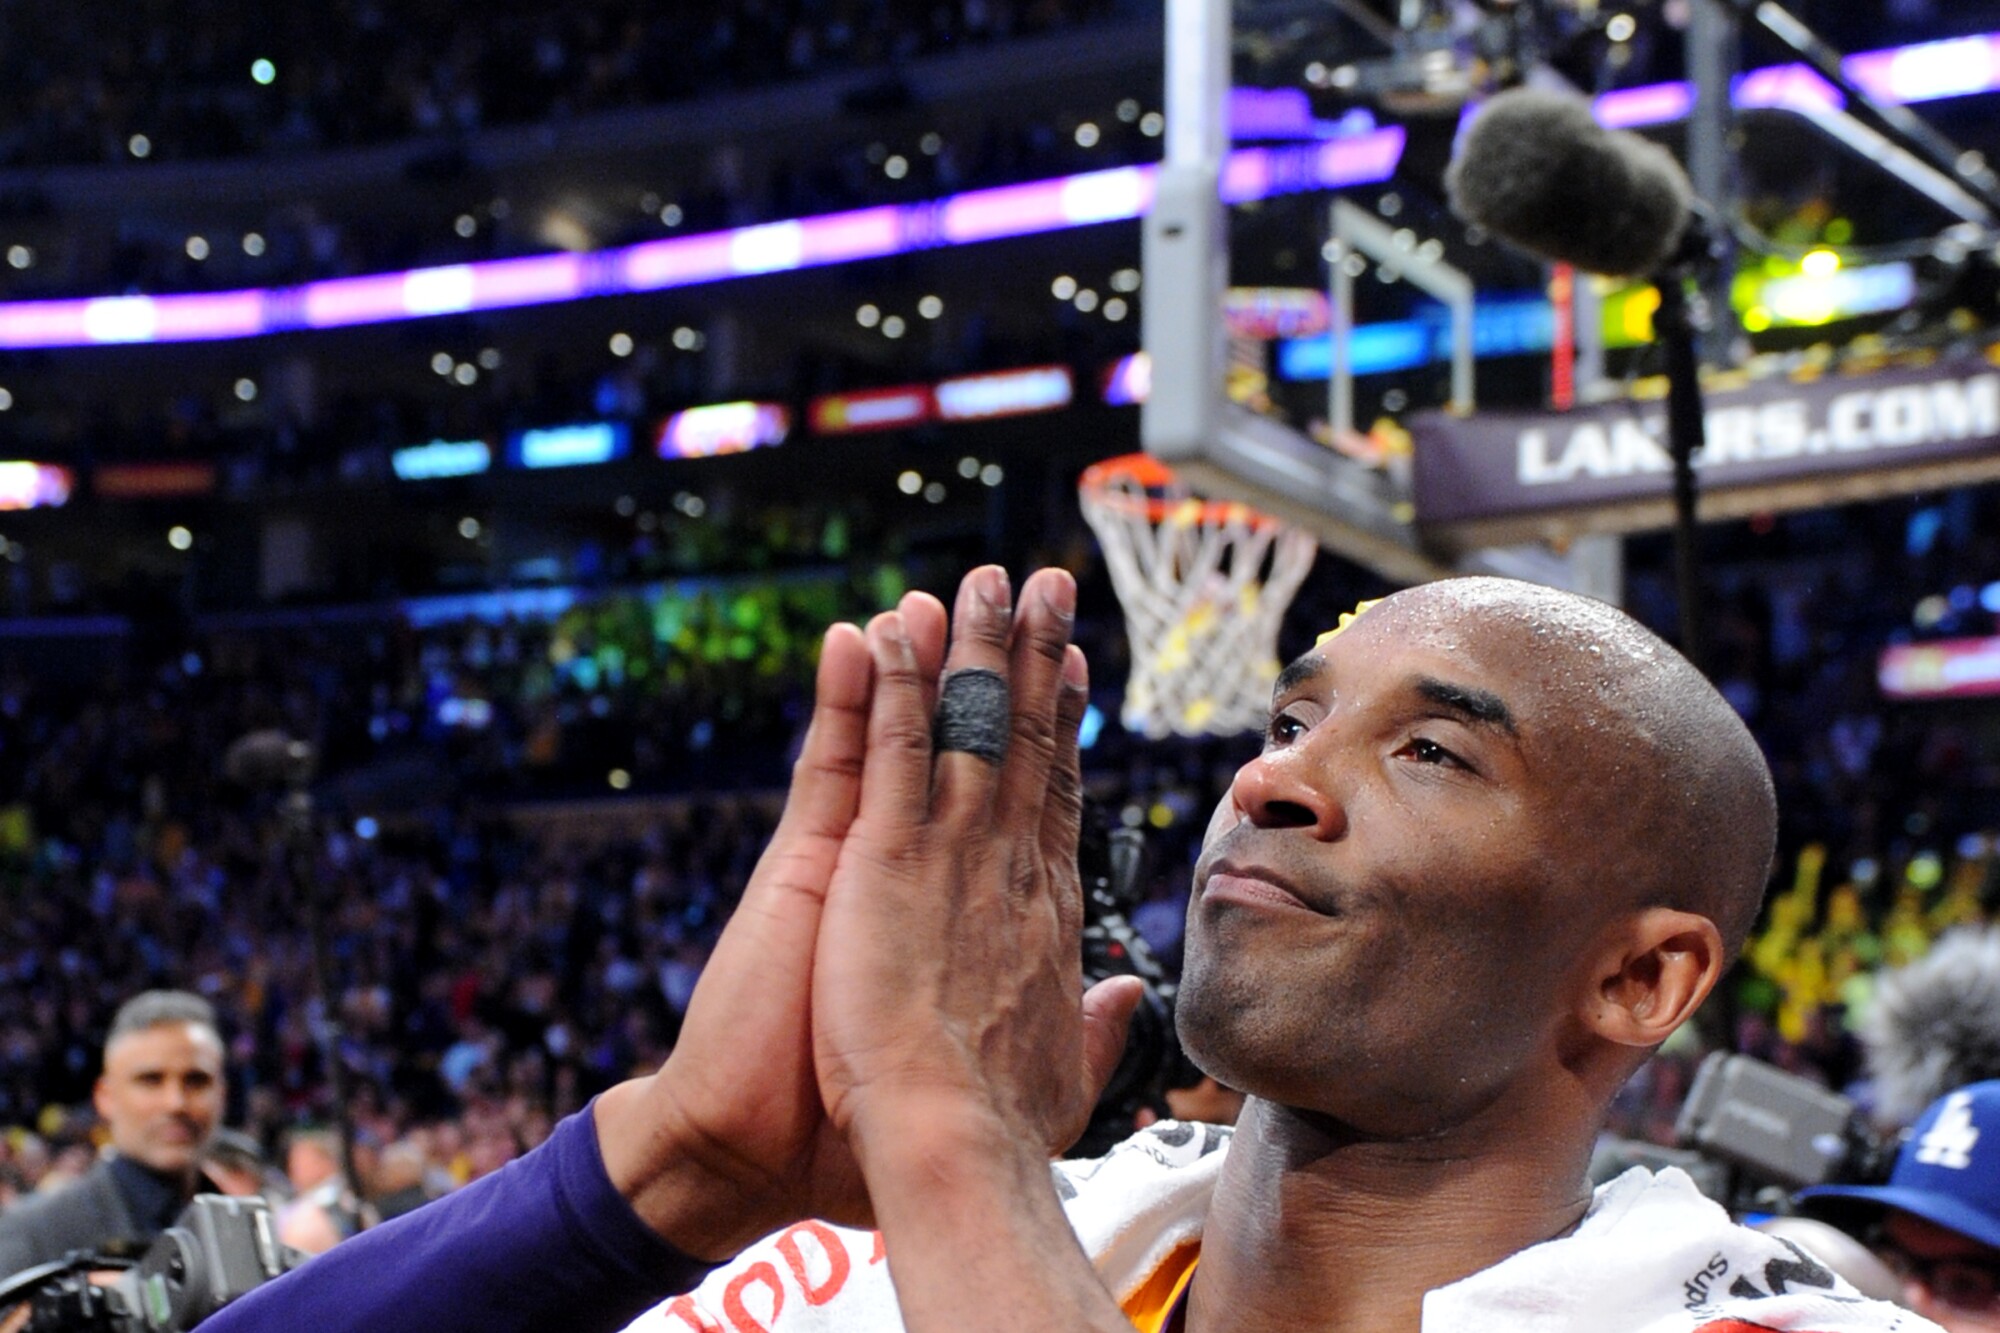 Lakers star Kobe Bryant pays homage to the crowd at Staples Center following the final game of his career on April 13, 2016.